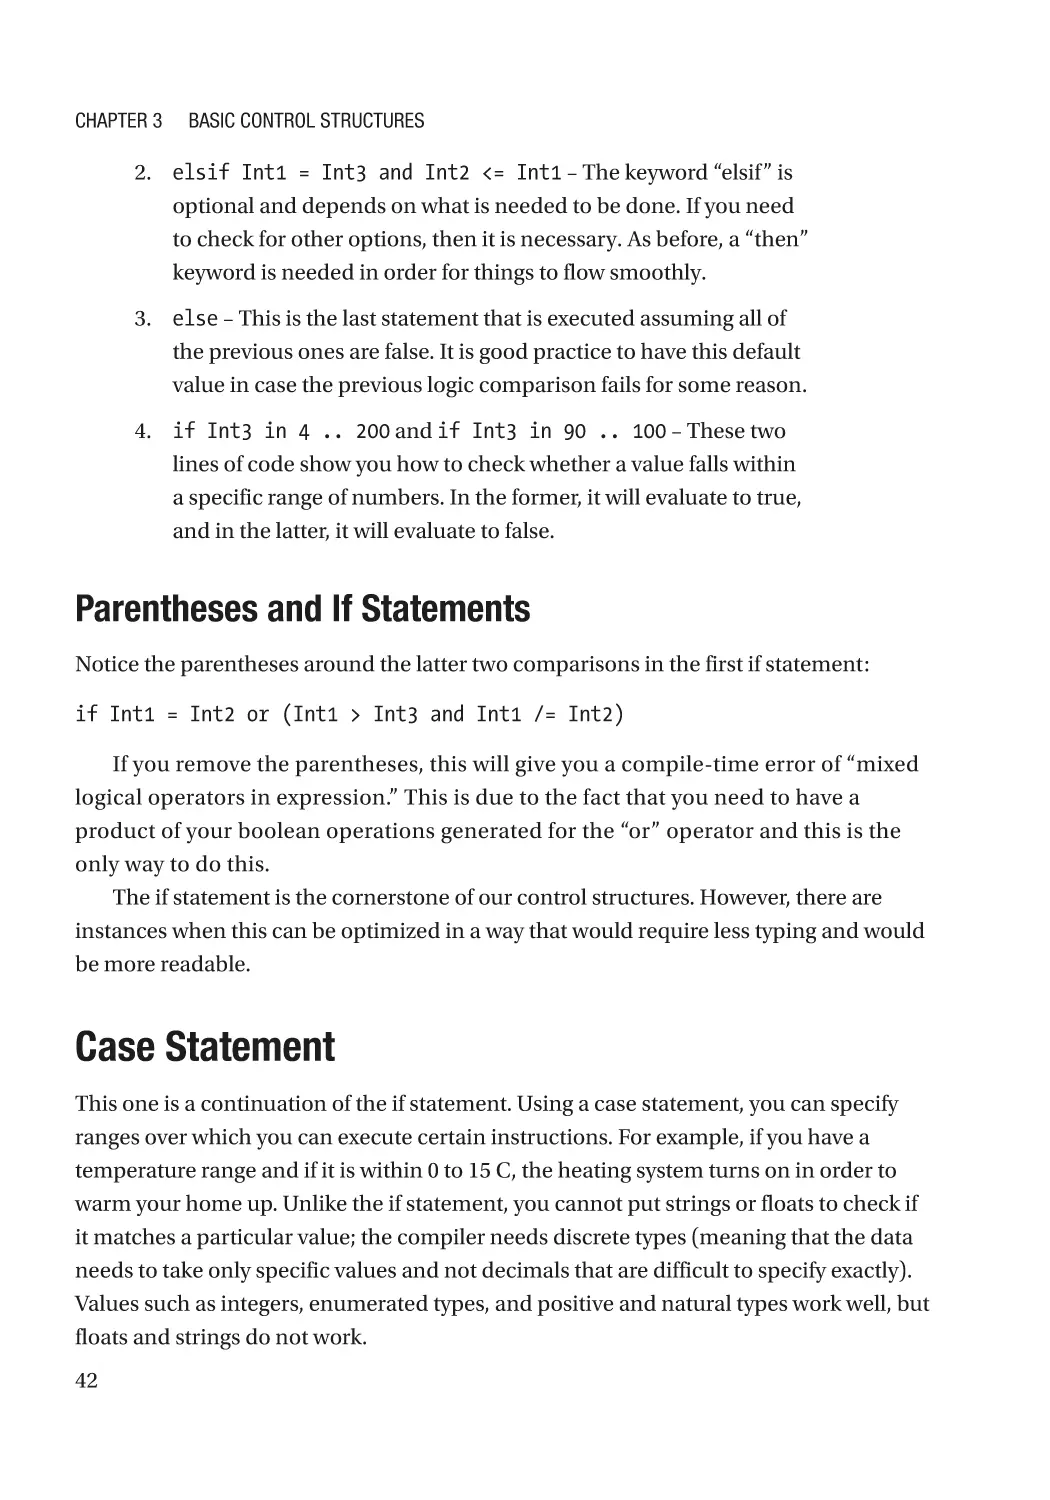 Parentheses and If Statements
Case Statement